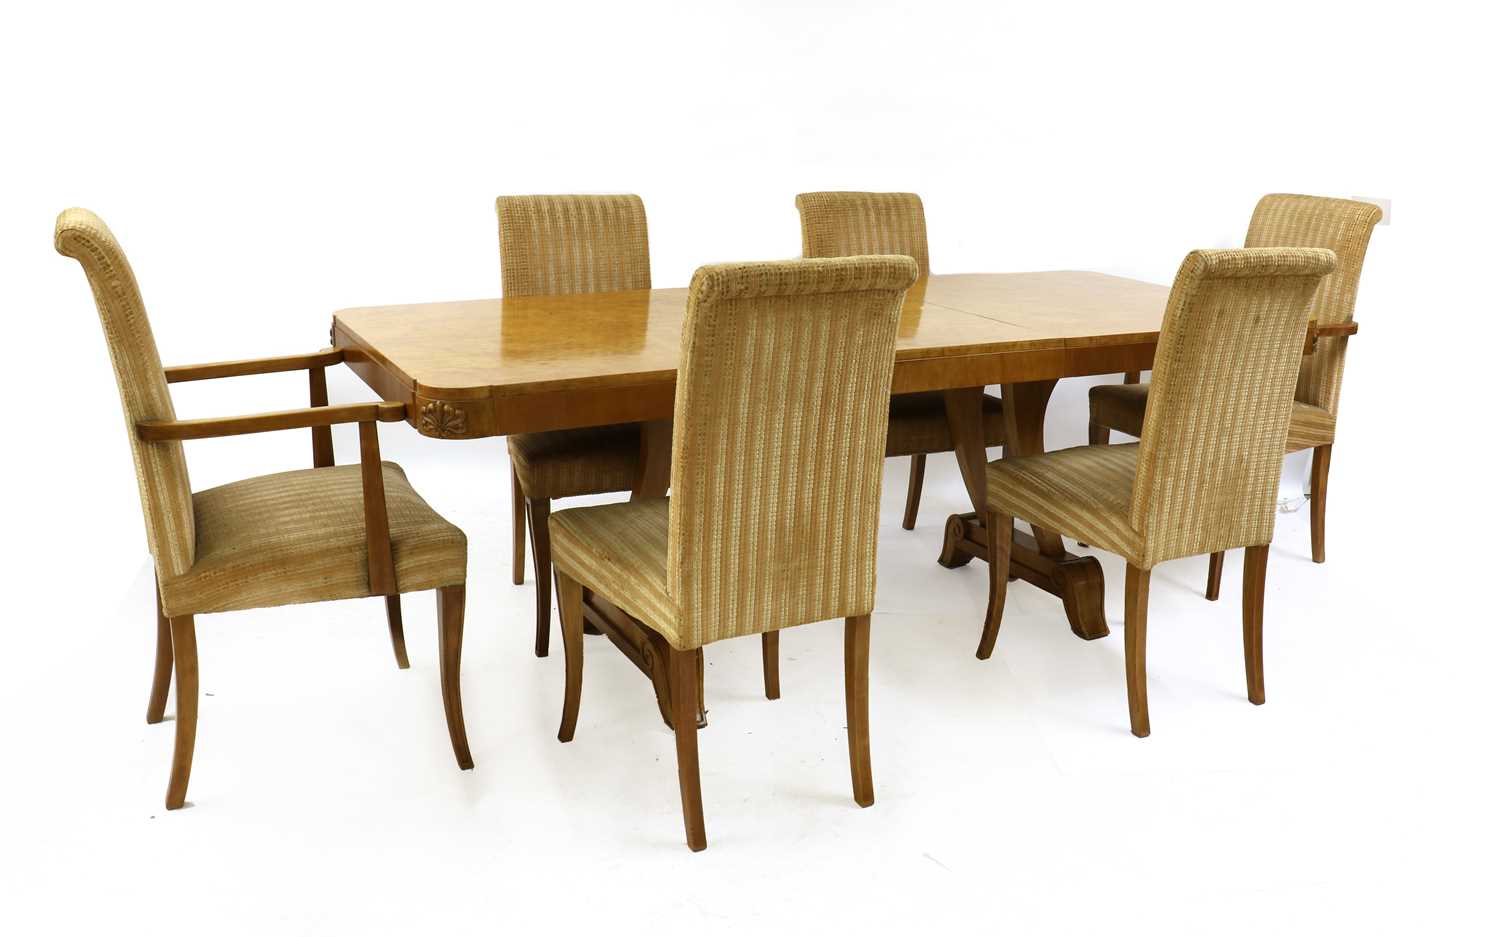 Lot 105 - An Art Deco burr maple dining table and six chairs